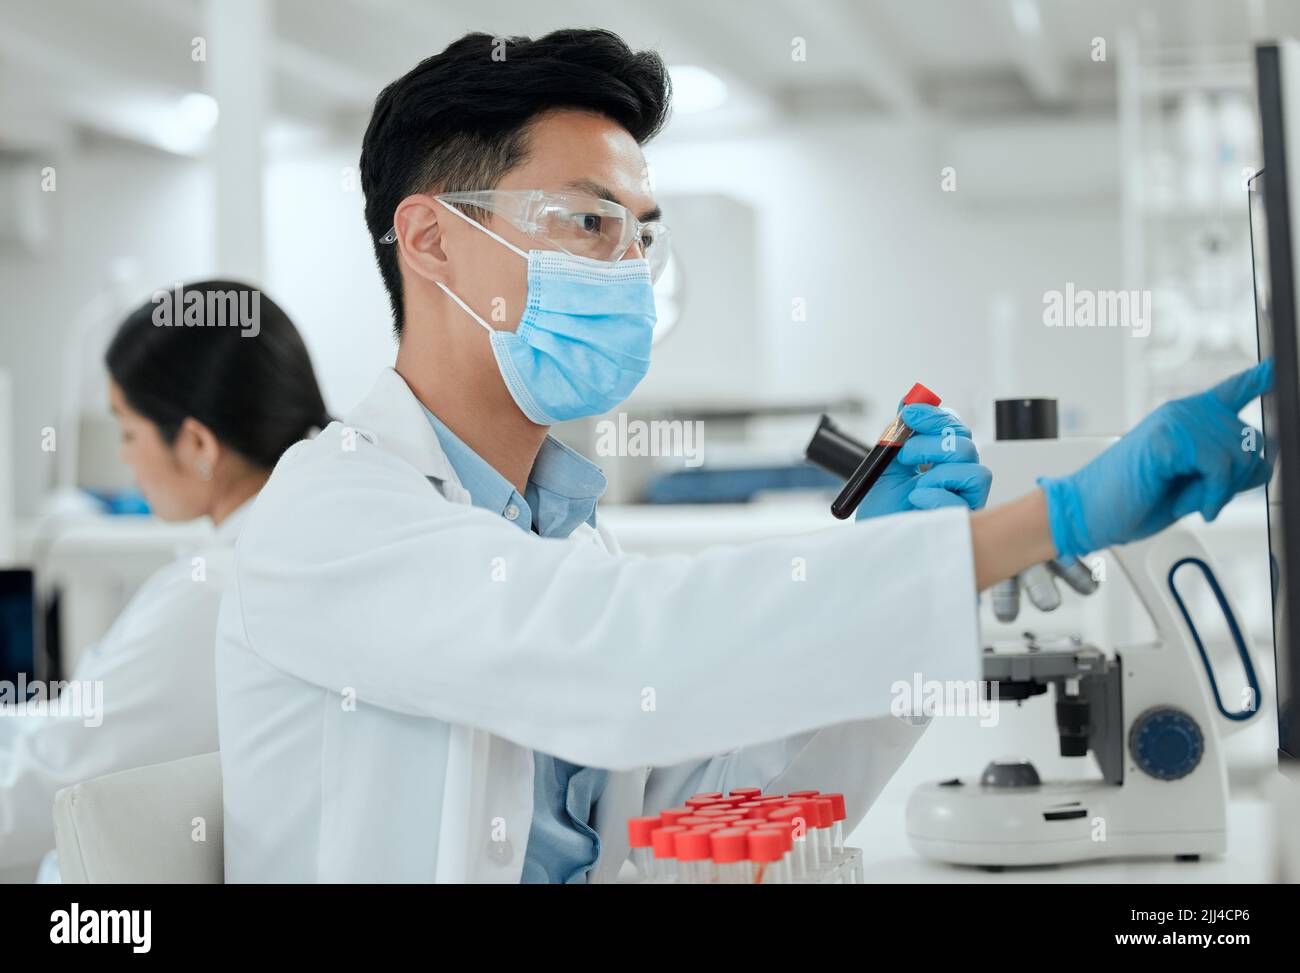 Doing high level research. a young male scientist working in a lab. Stock Photo